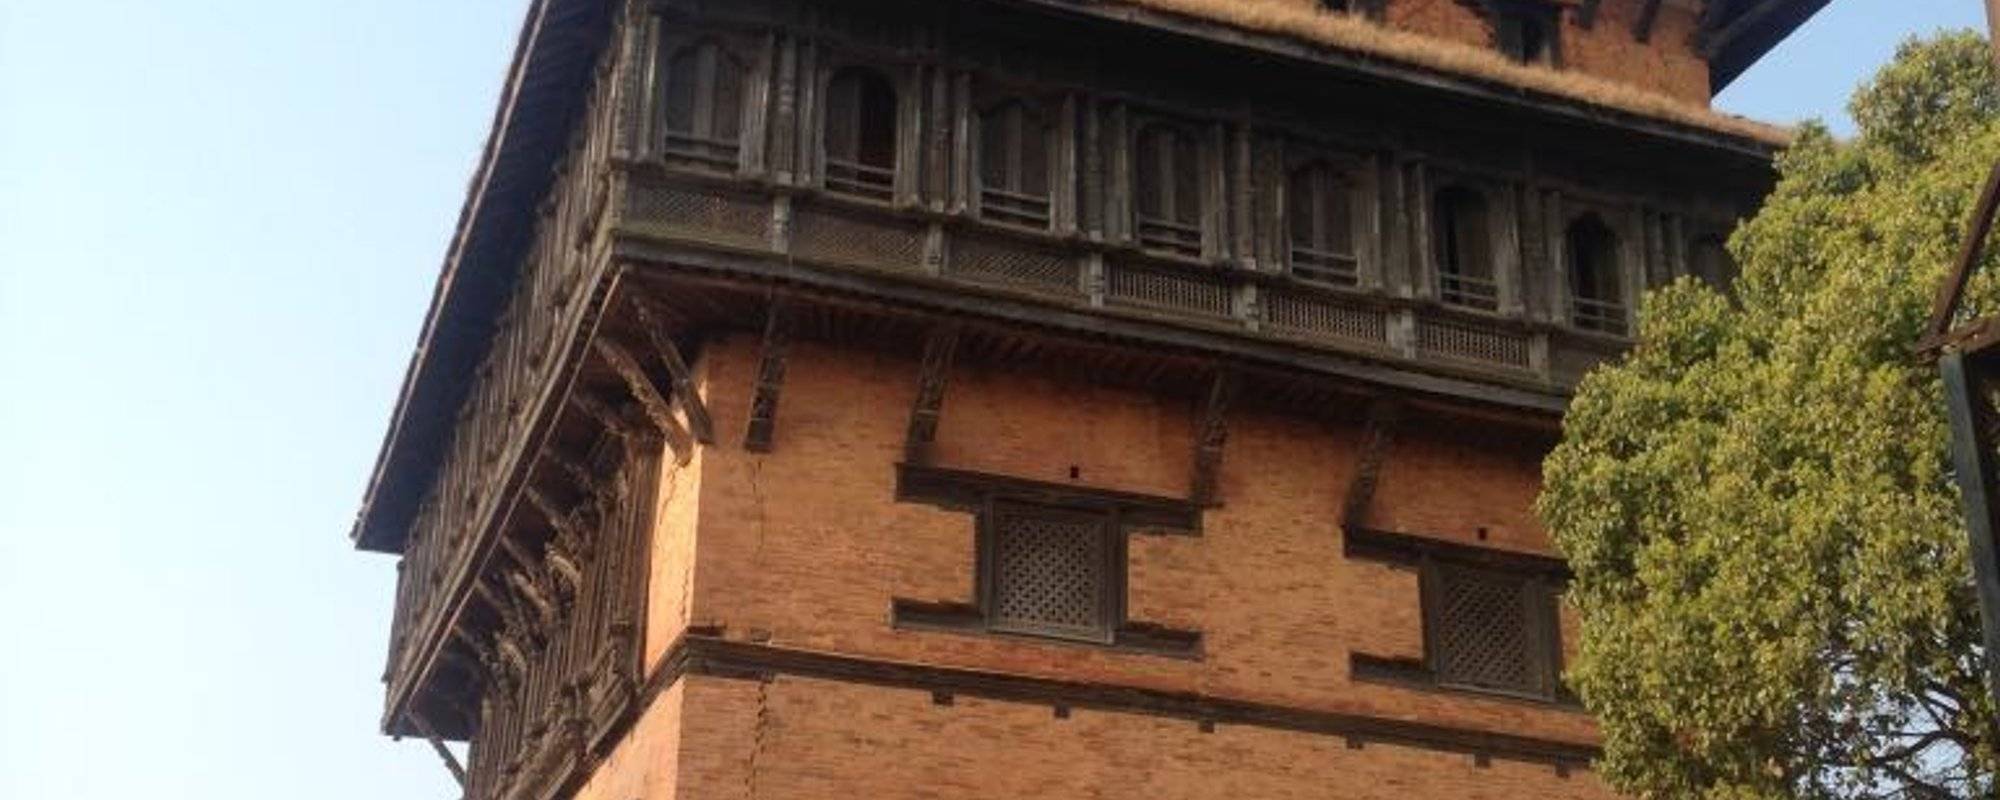 Well Off the Beaten Path (Episode One) - Restoration of Saat Tale Royal Palace - Nuwakot, Nepal